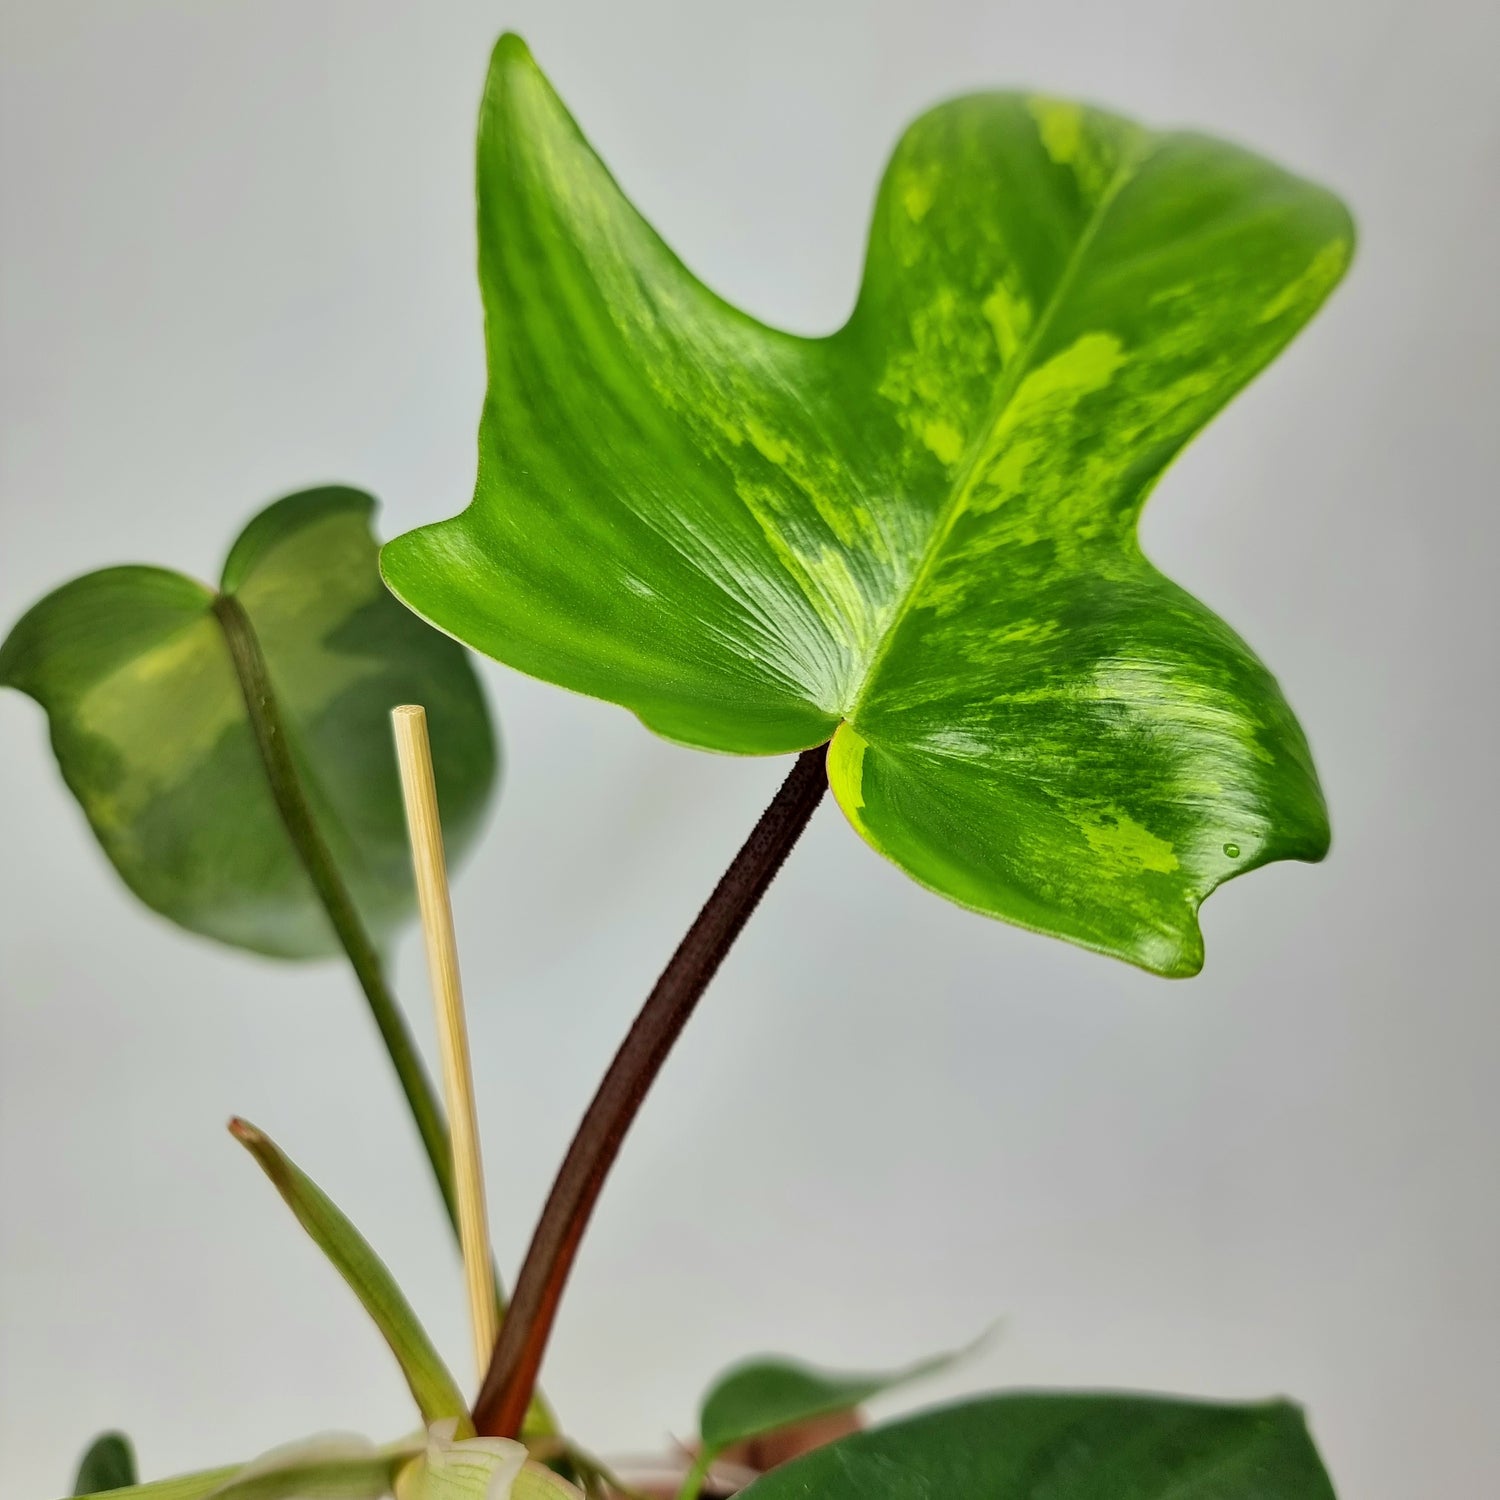 Philodendron Florida Beauty for sale in Perth Australia